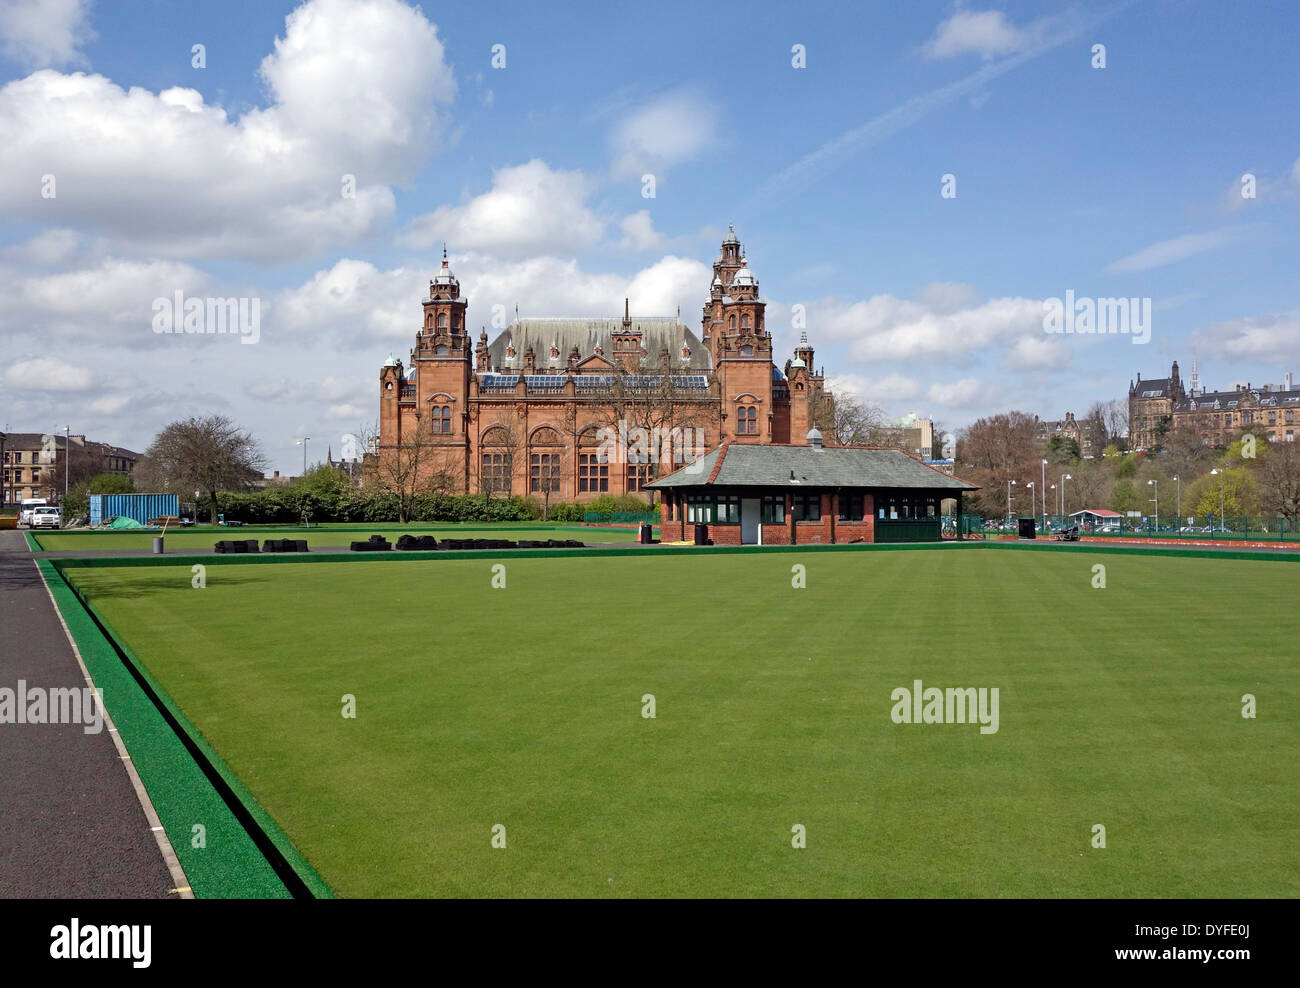 View from the west of Kelvingrove Art Gallery & Museum in the west end of Glasgow Scotland with bowling green and house front Stock Photo